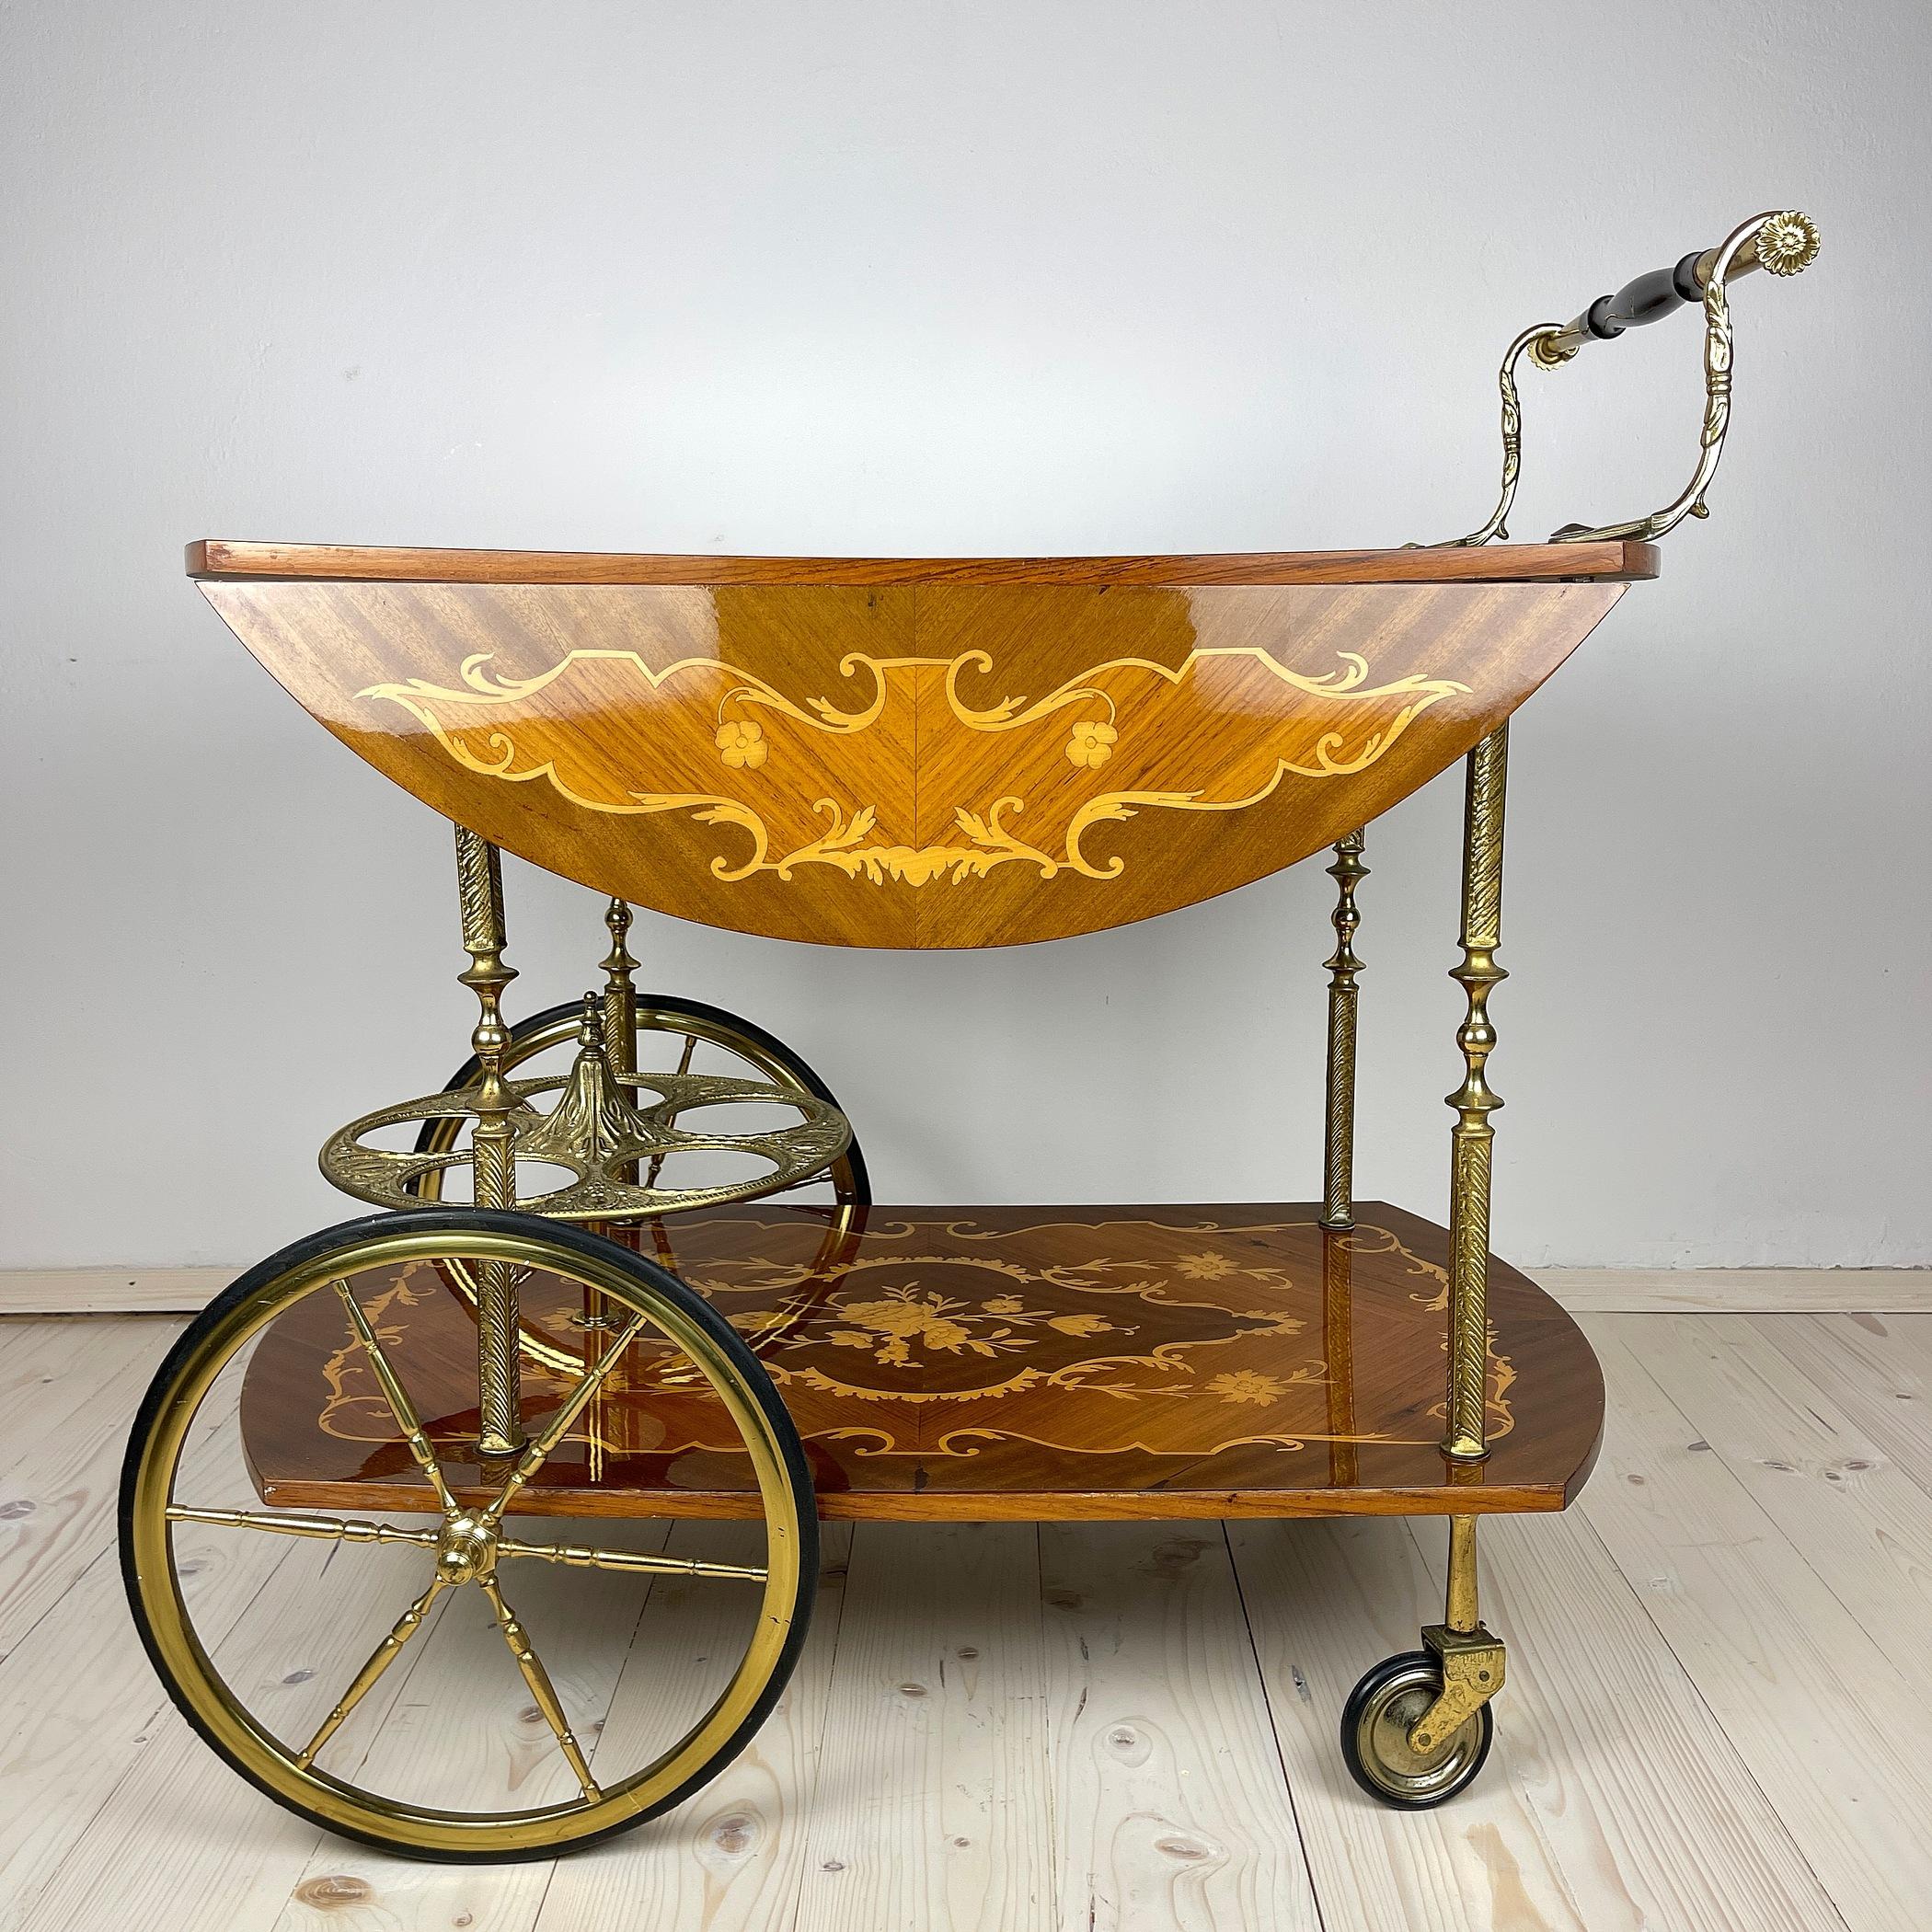 Vintage Italian bar cart with marquetry inlay on 4 wheels. This cocktail bar drinks cart was made in Italy in the 1950s Hollywood Regency style. Thanks to the ornate woodwork, the cart is a real craftsmanship. It has floral and scroll work inlay.